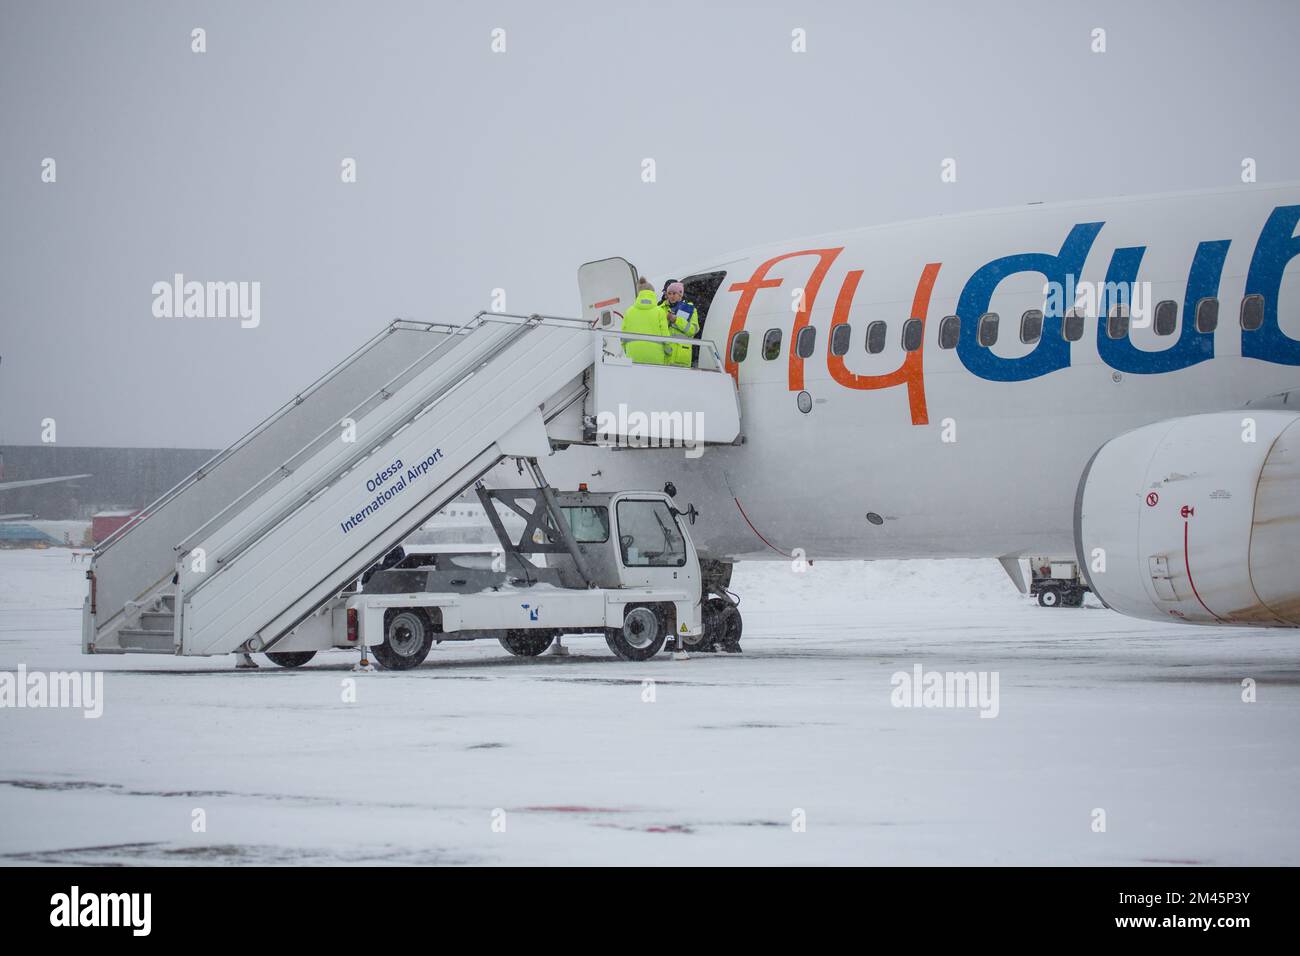 Odessa, Ukraine - CIRCA 2018: Passenger plane Fly Dubai at airport in winter in blizzard. Landing passengers in airliner in winter during snowstorm. M Stock Photo